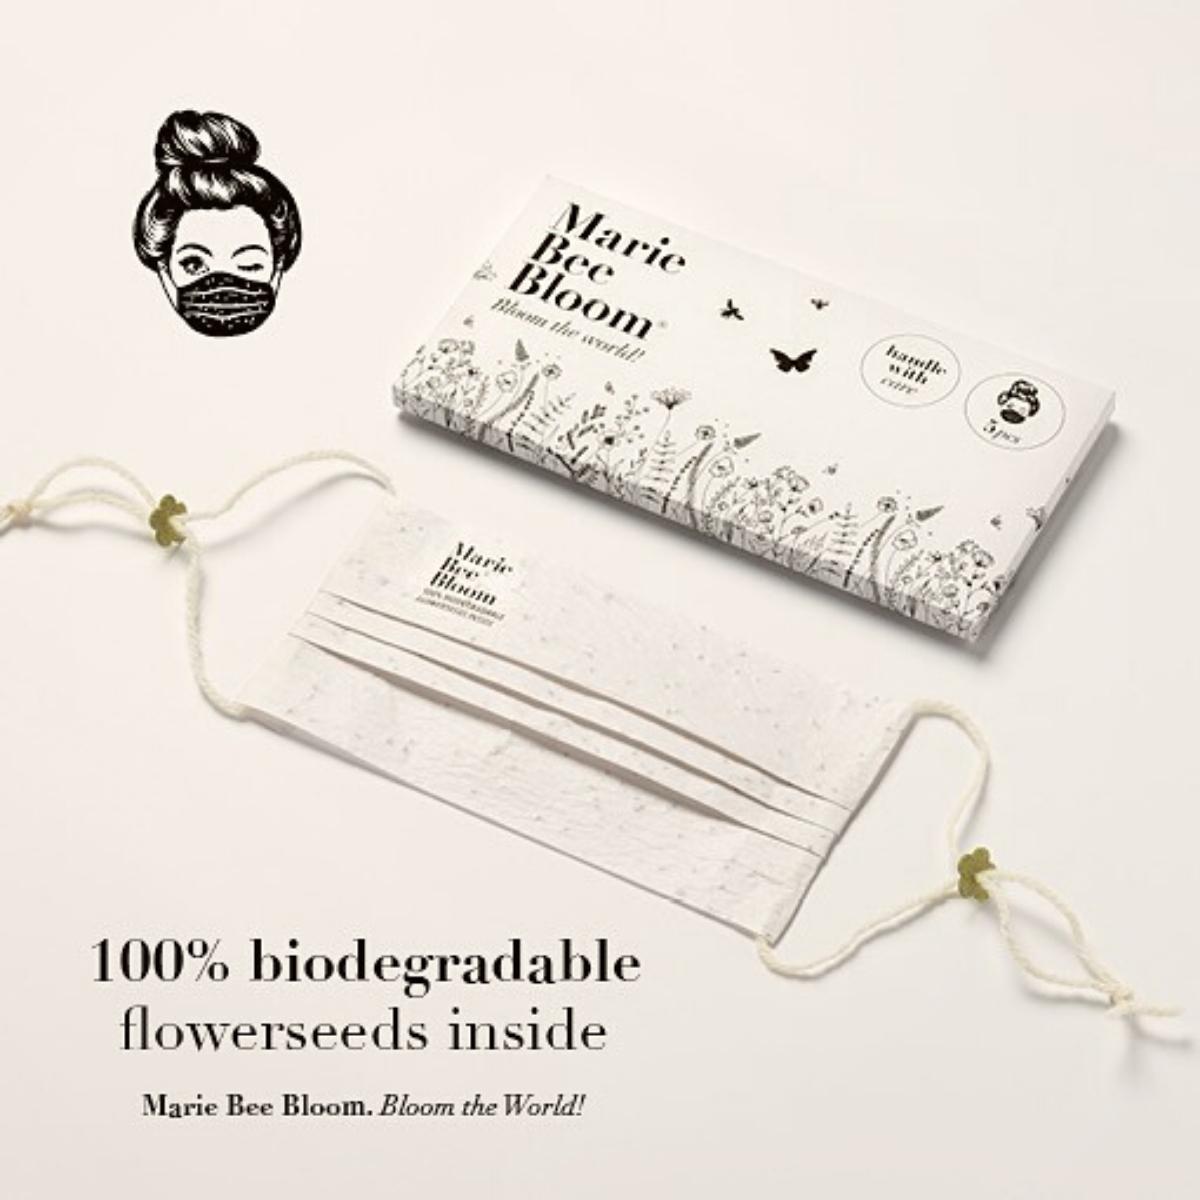 Biodegradable masks by Marie Bee Bloom on Thursd